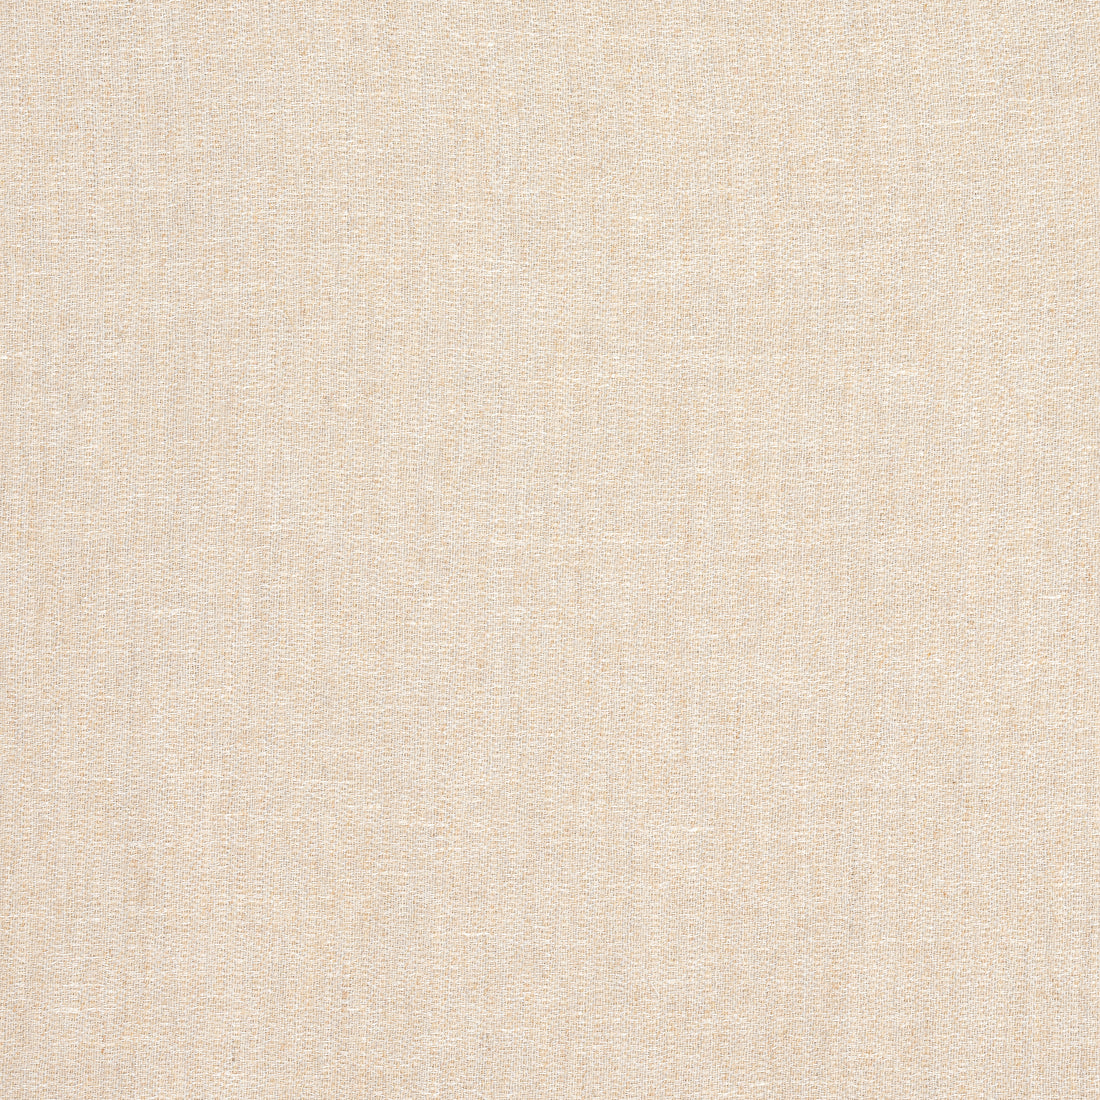 Laramie fabric in cashmere color - pattern number FWW8206 - by Thibaut in the Aura collection